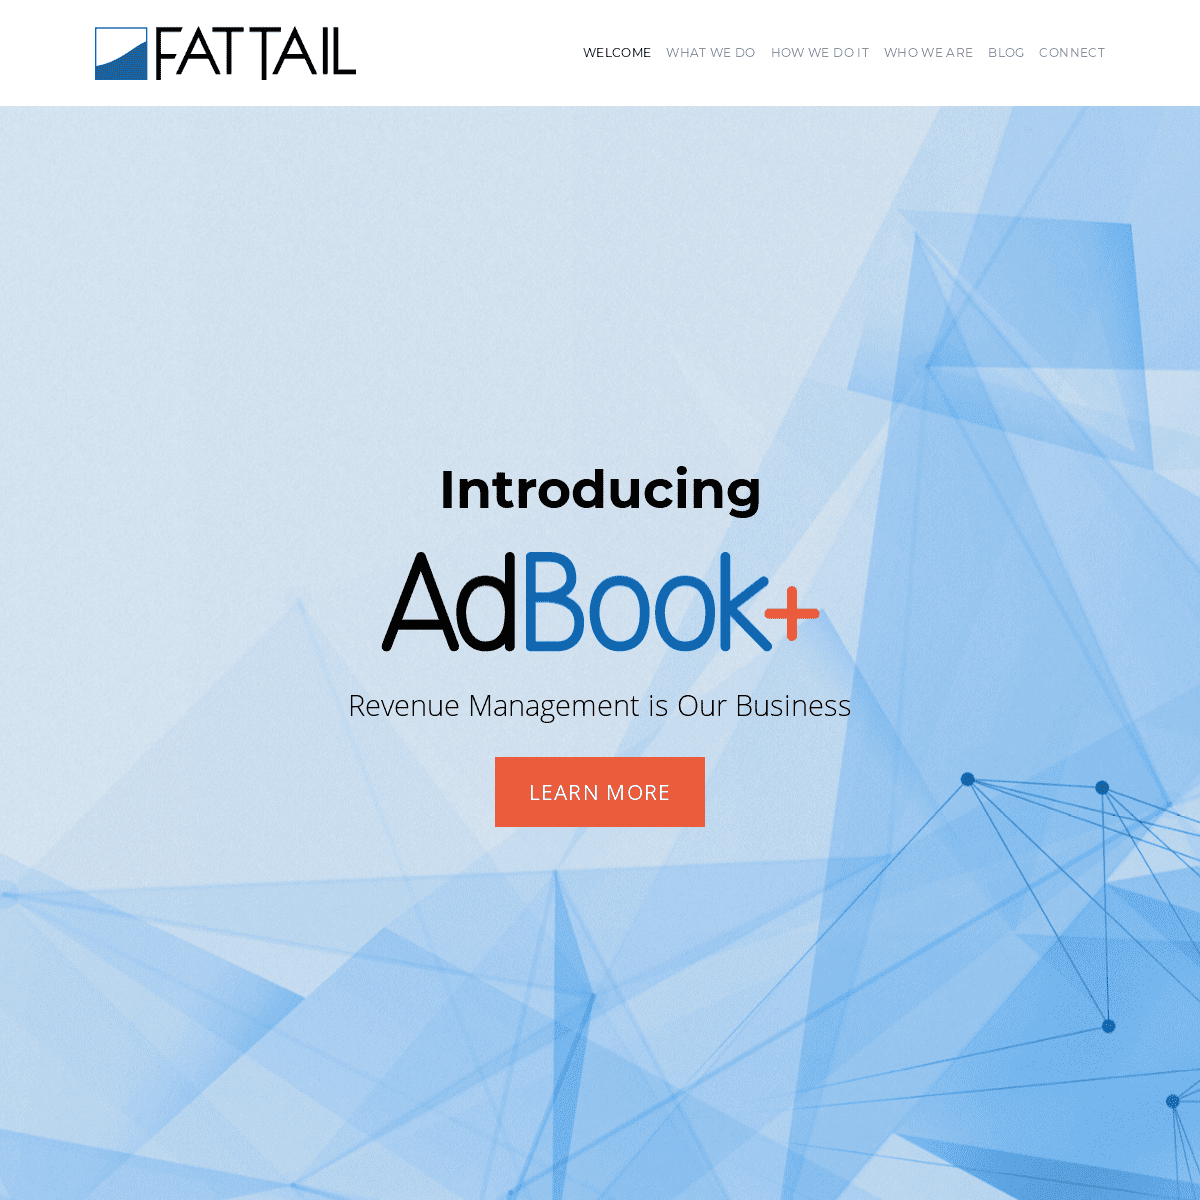 A complete backup of fattail.com